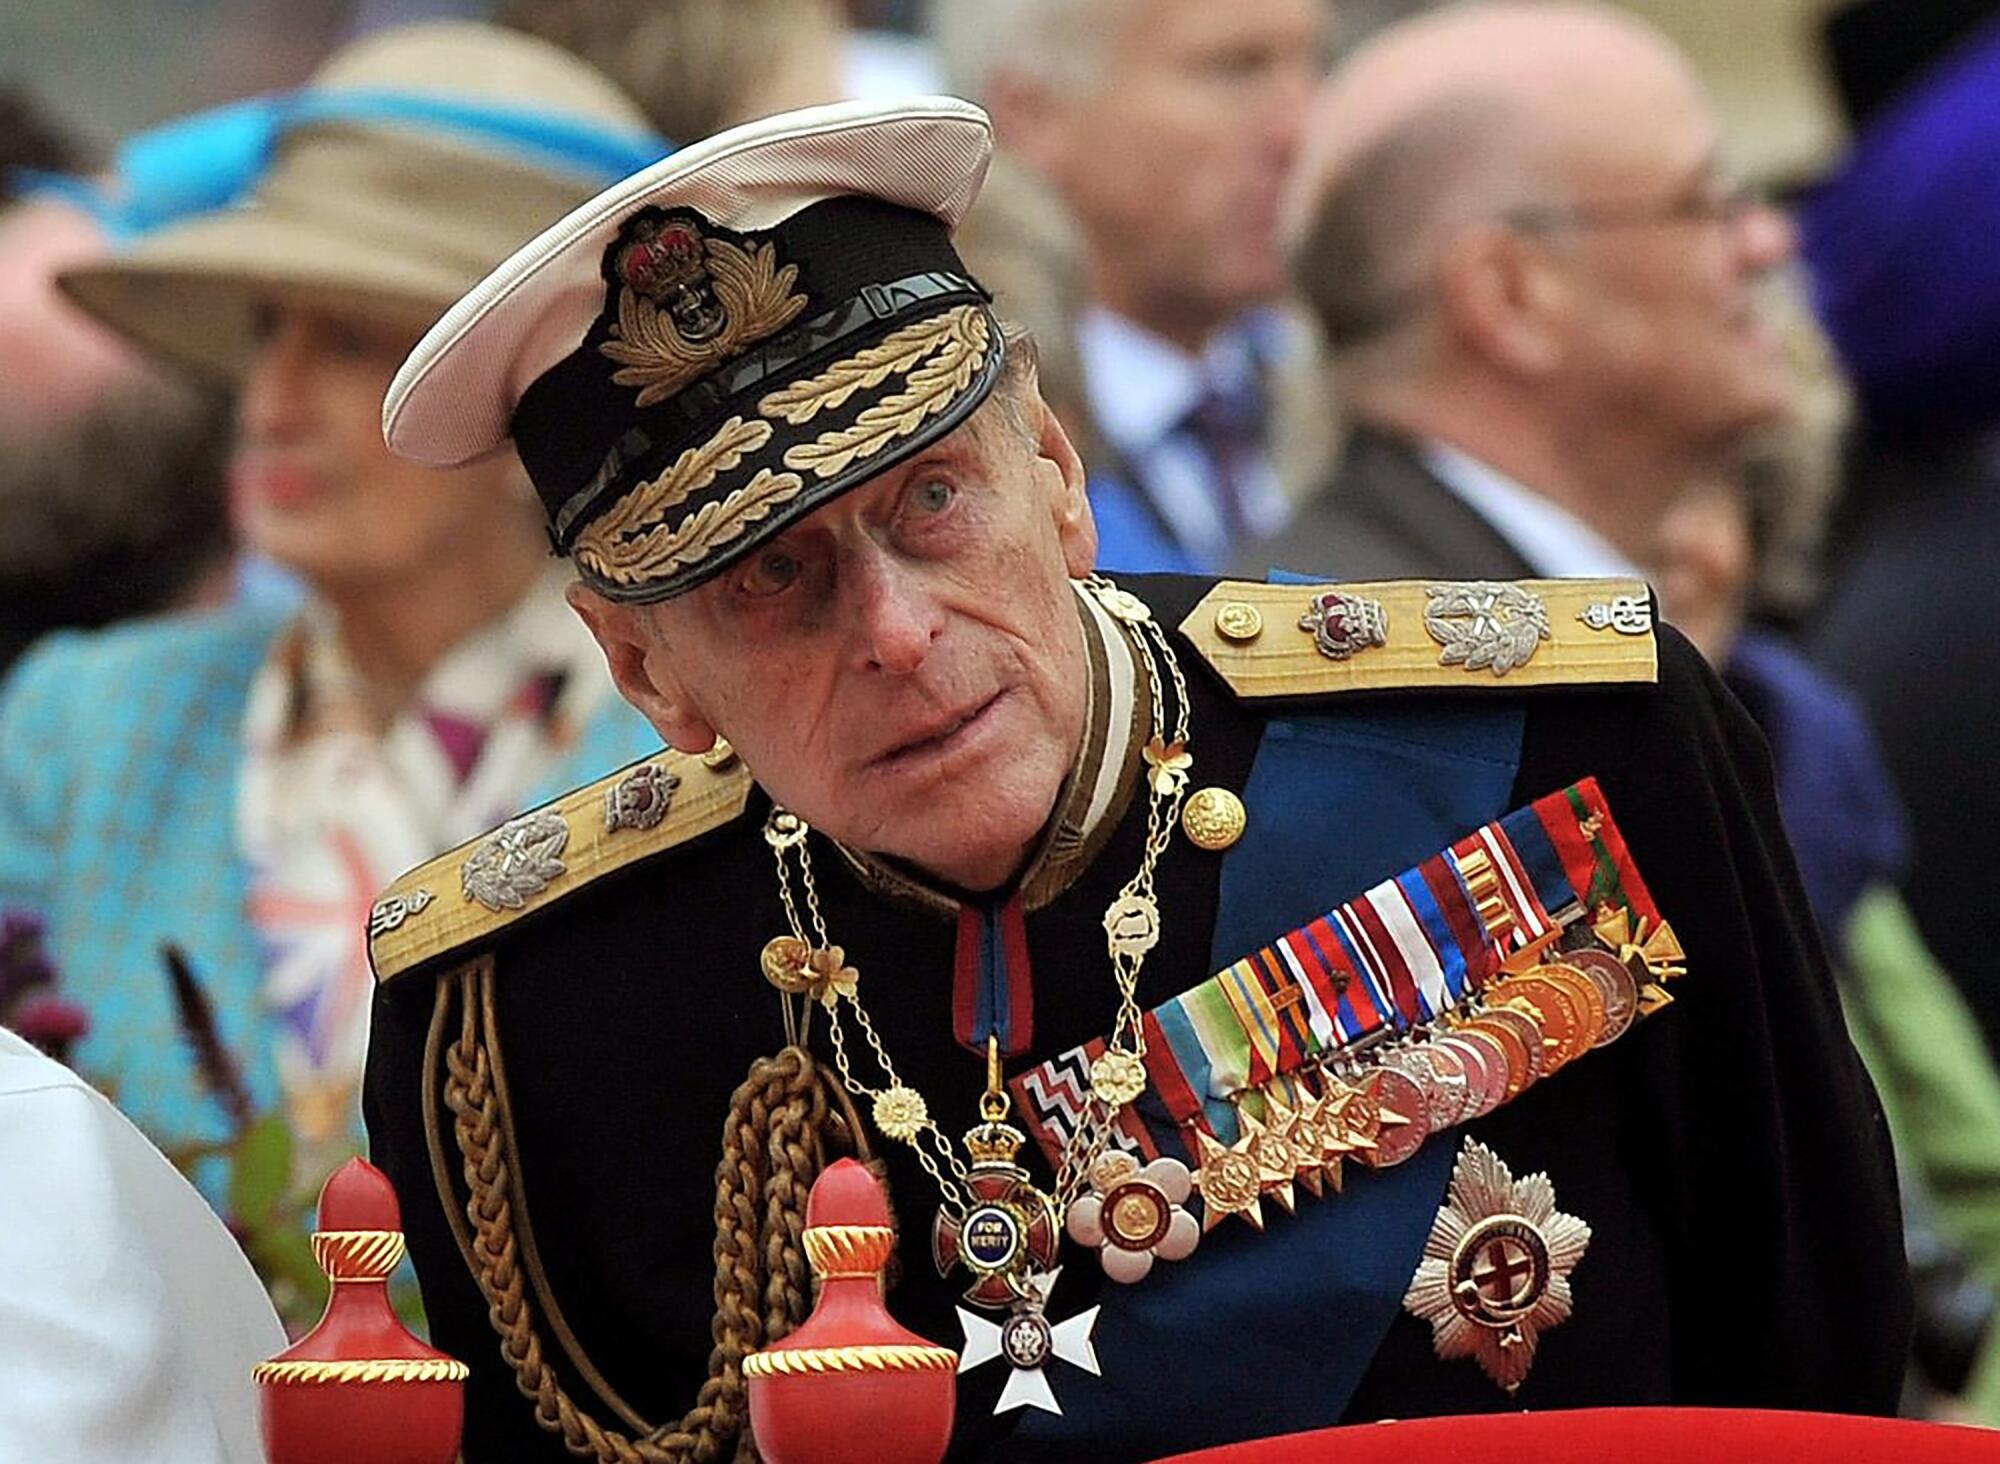 Prince Philip attends an event in naval uniform in 2012.